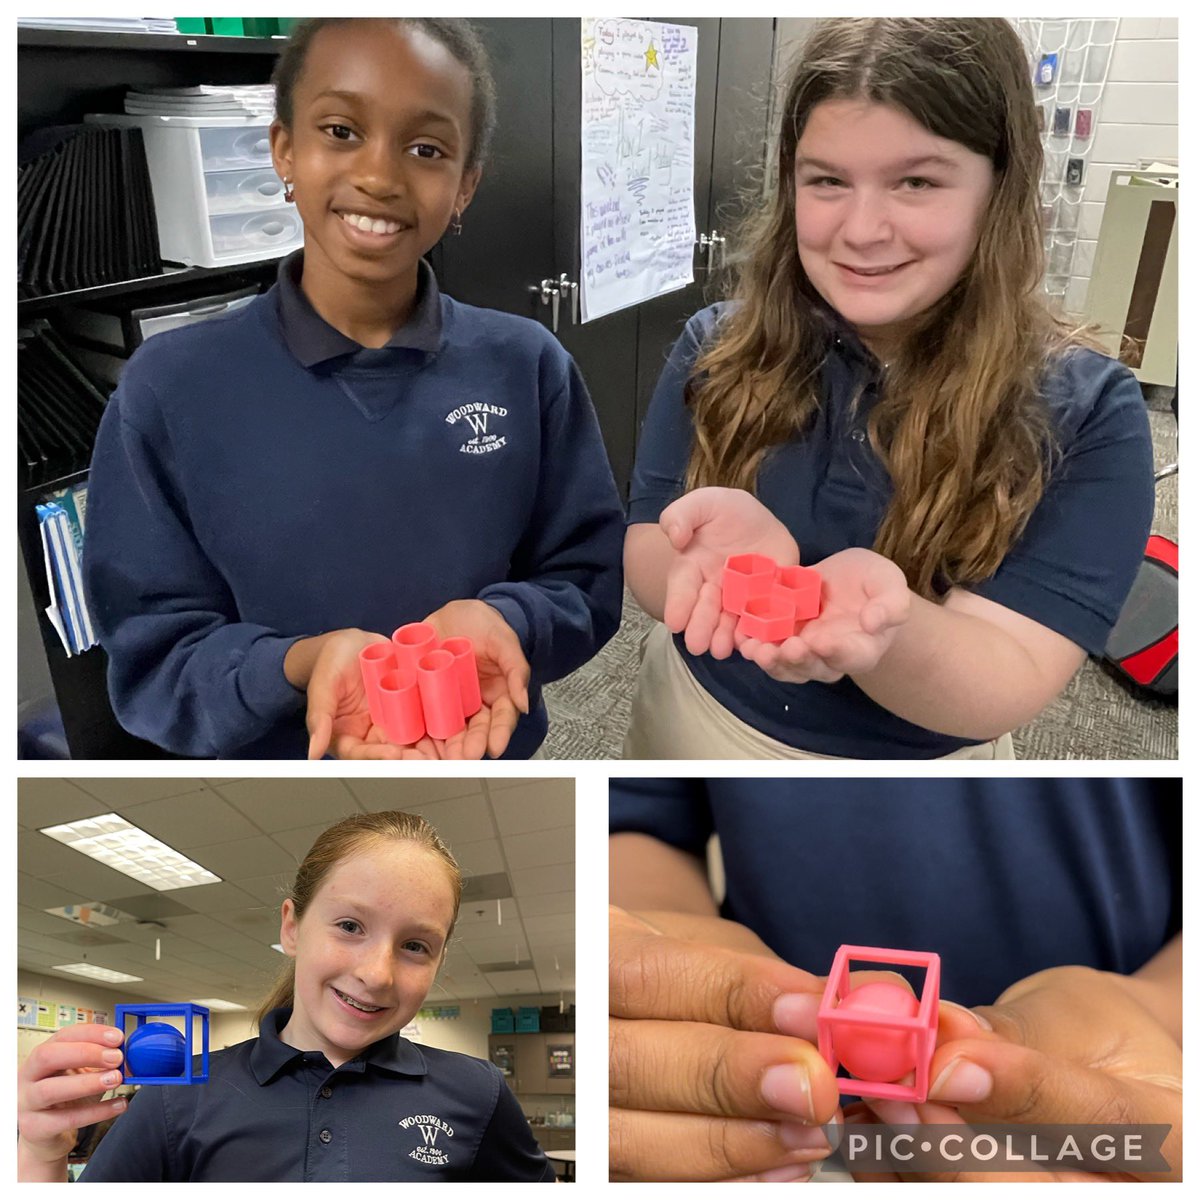 These math students created desk caddies and impossible puzzle boxes after our geometry unit using @tinkercad and our 3D printer! @WoodwardAcademy @TeacherTammyF @Natalie_STEAM